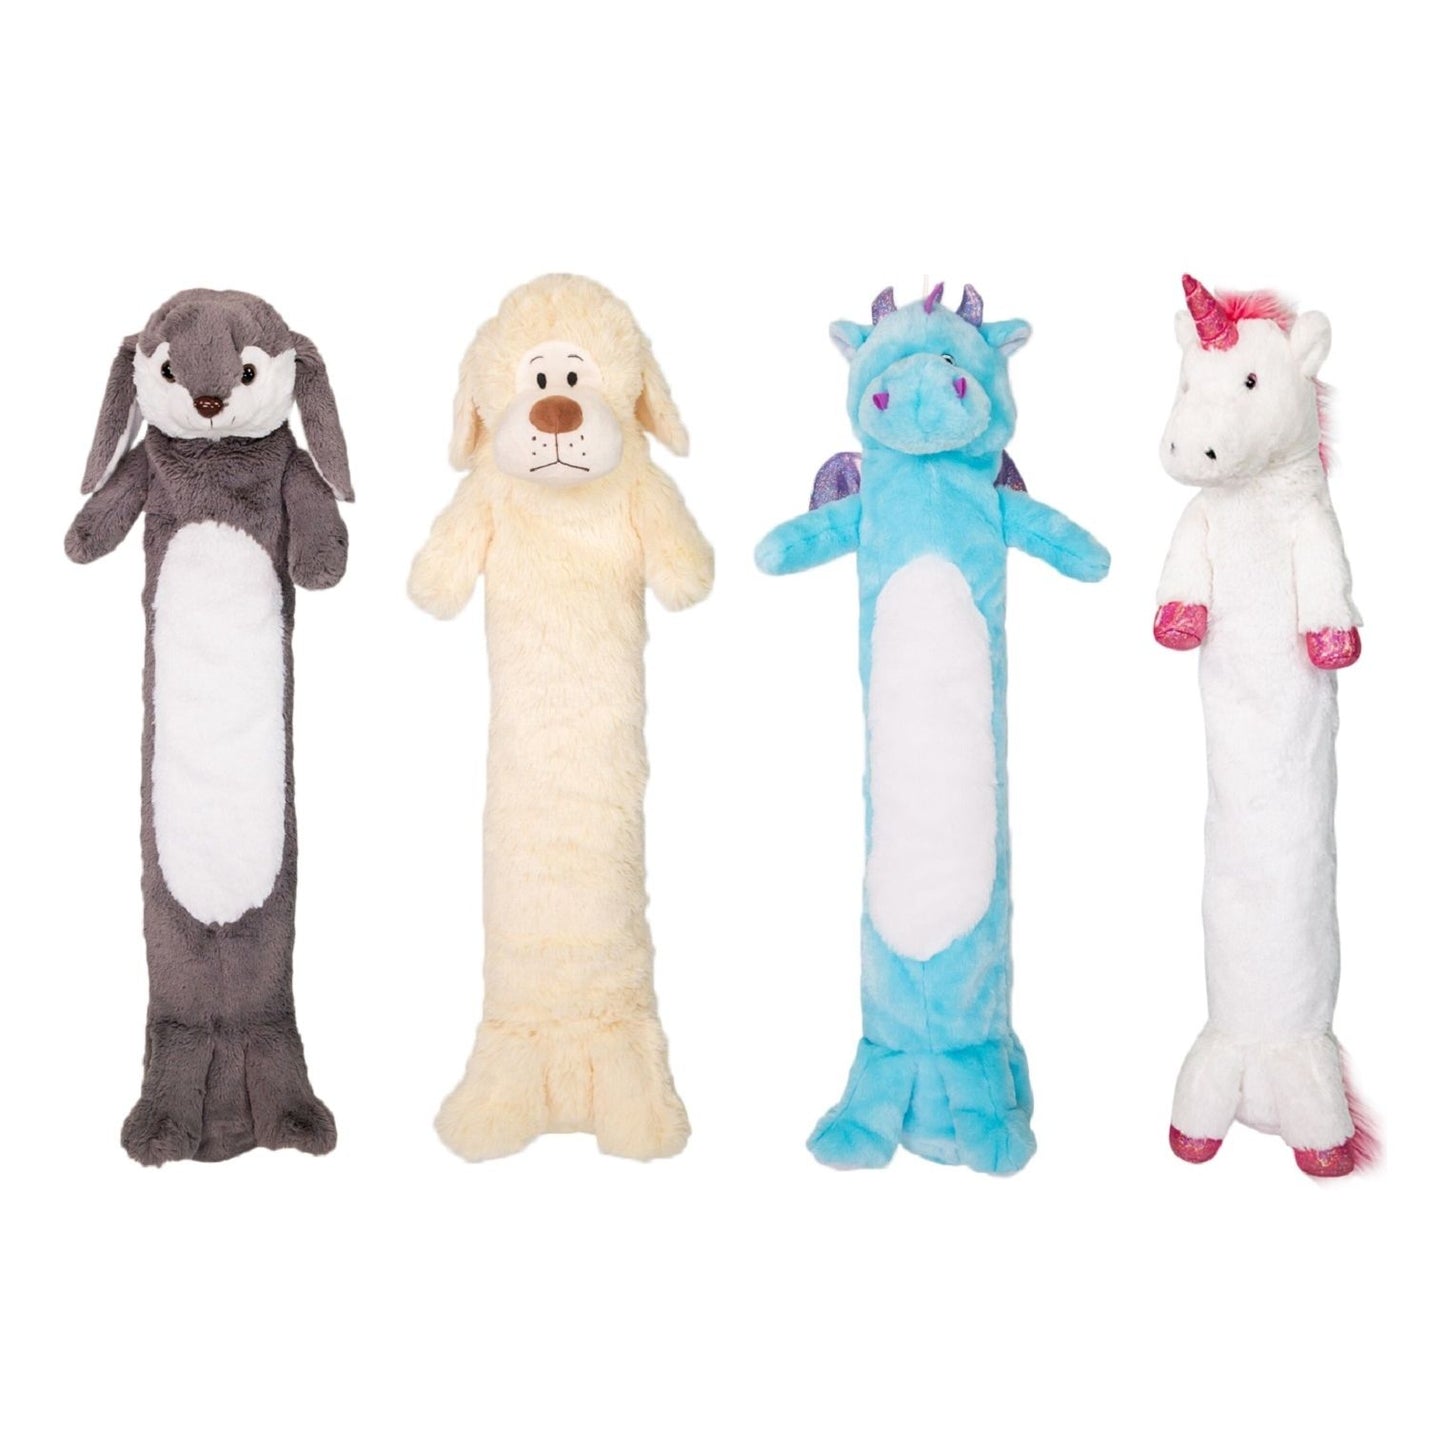 The Hot Water Bottle Shop Childrens Long Hot Water Bottle with Cover